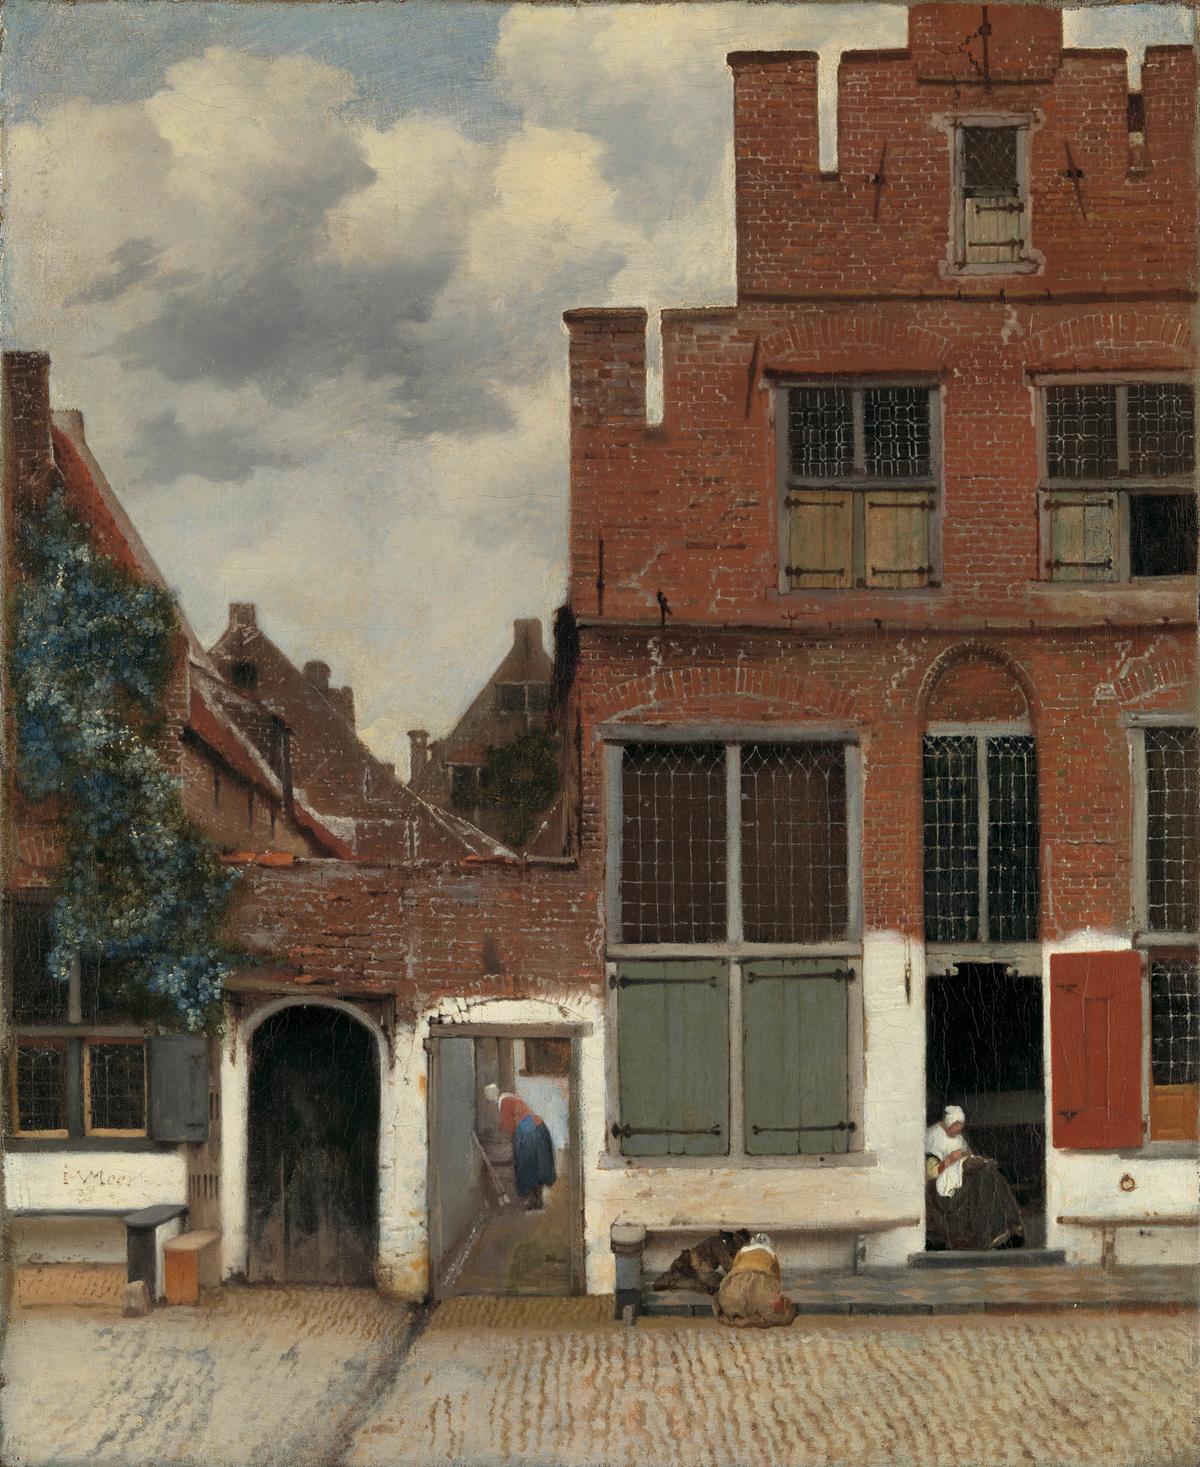 “View of Houses in Delft, Known as ‘The Little Street,'” circa 1658, by Johannes Vermeer. Oil on canvas; 21 3/8 inches by 17 1/3 inches. Rijksmuseum, Amsterdam. (Public Domain)